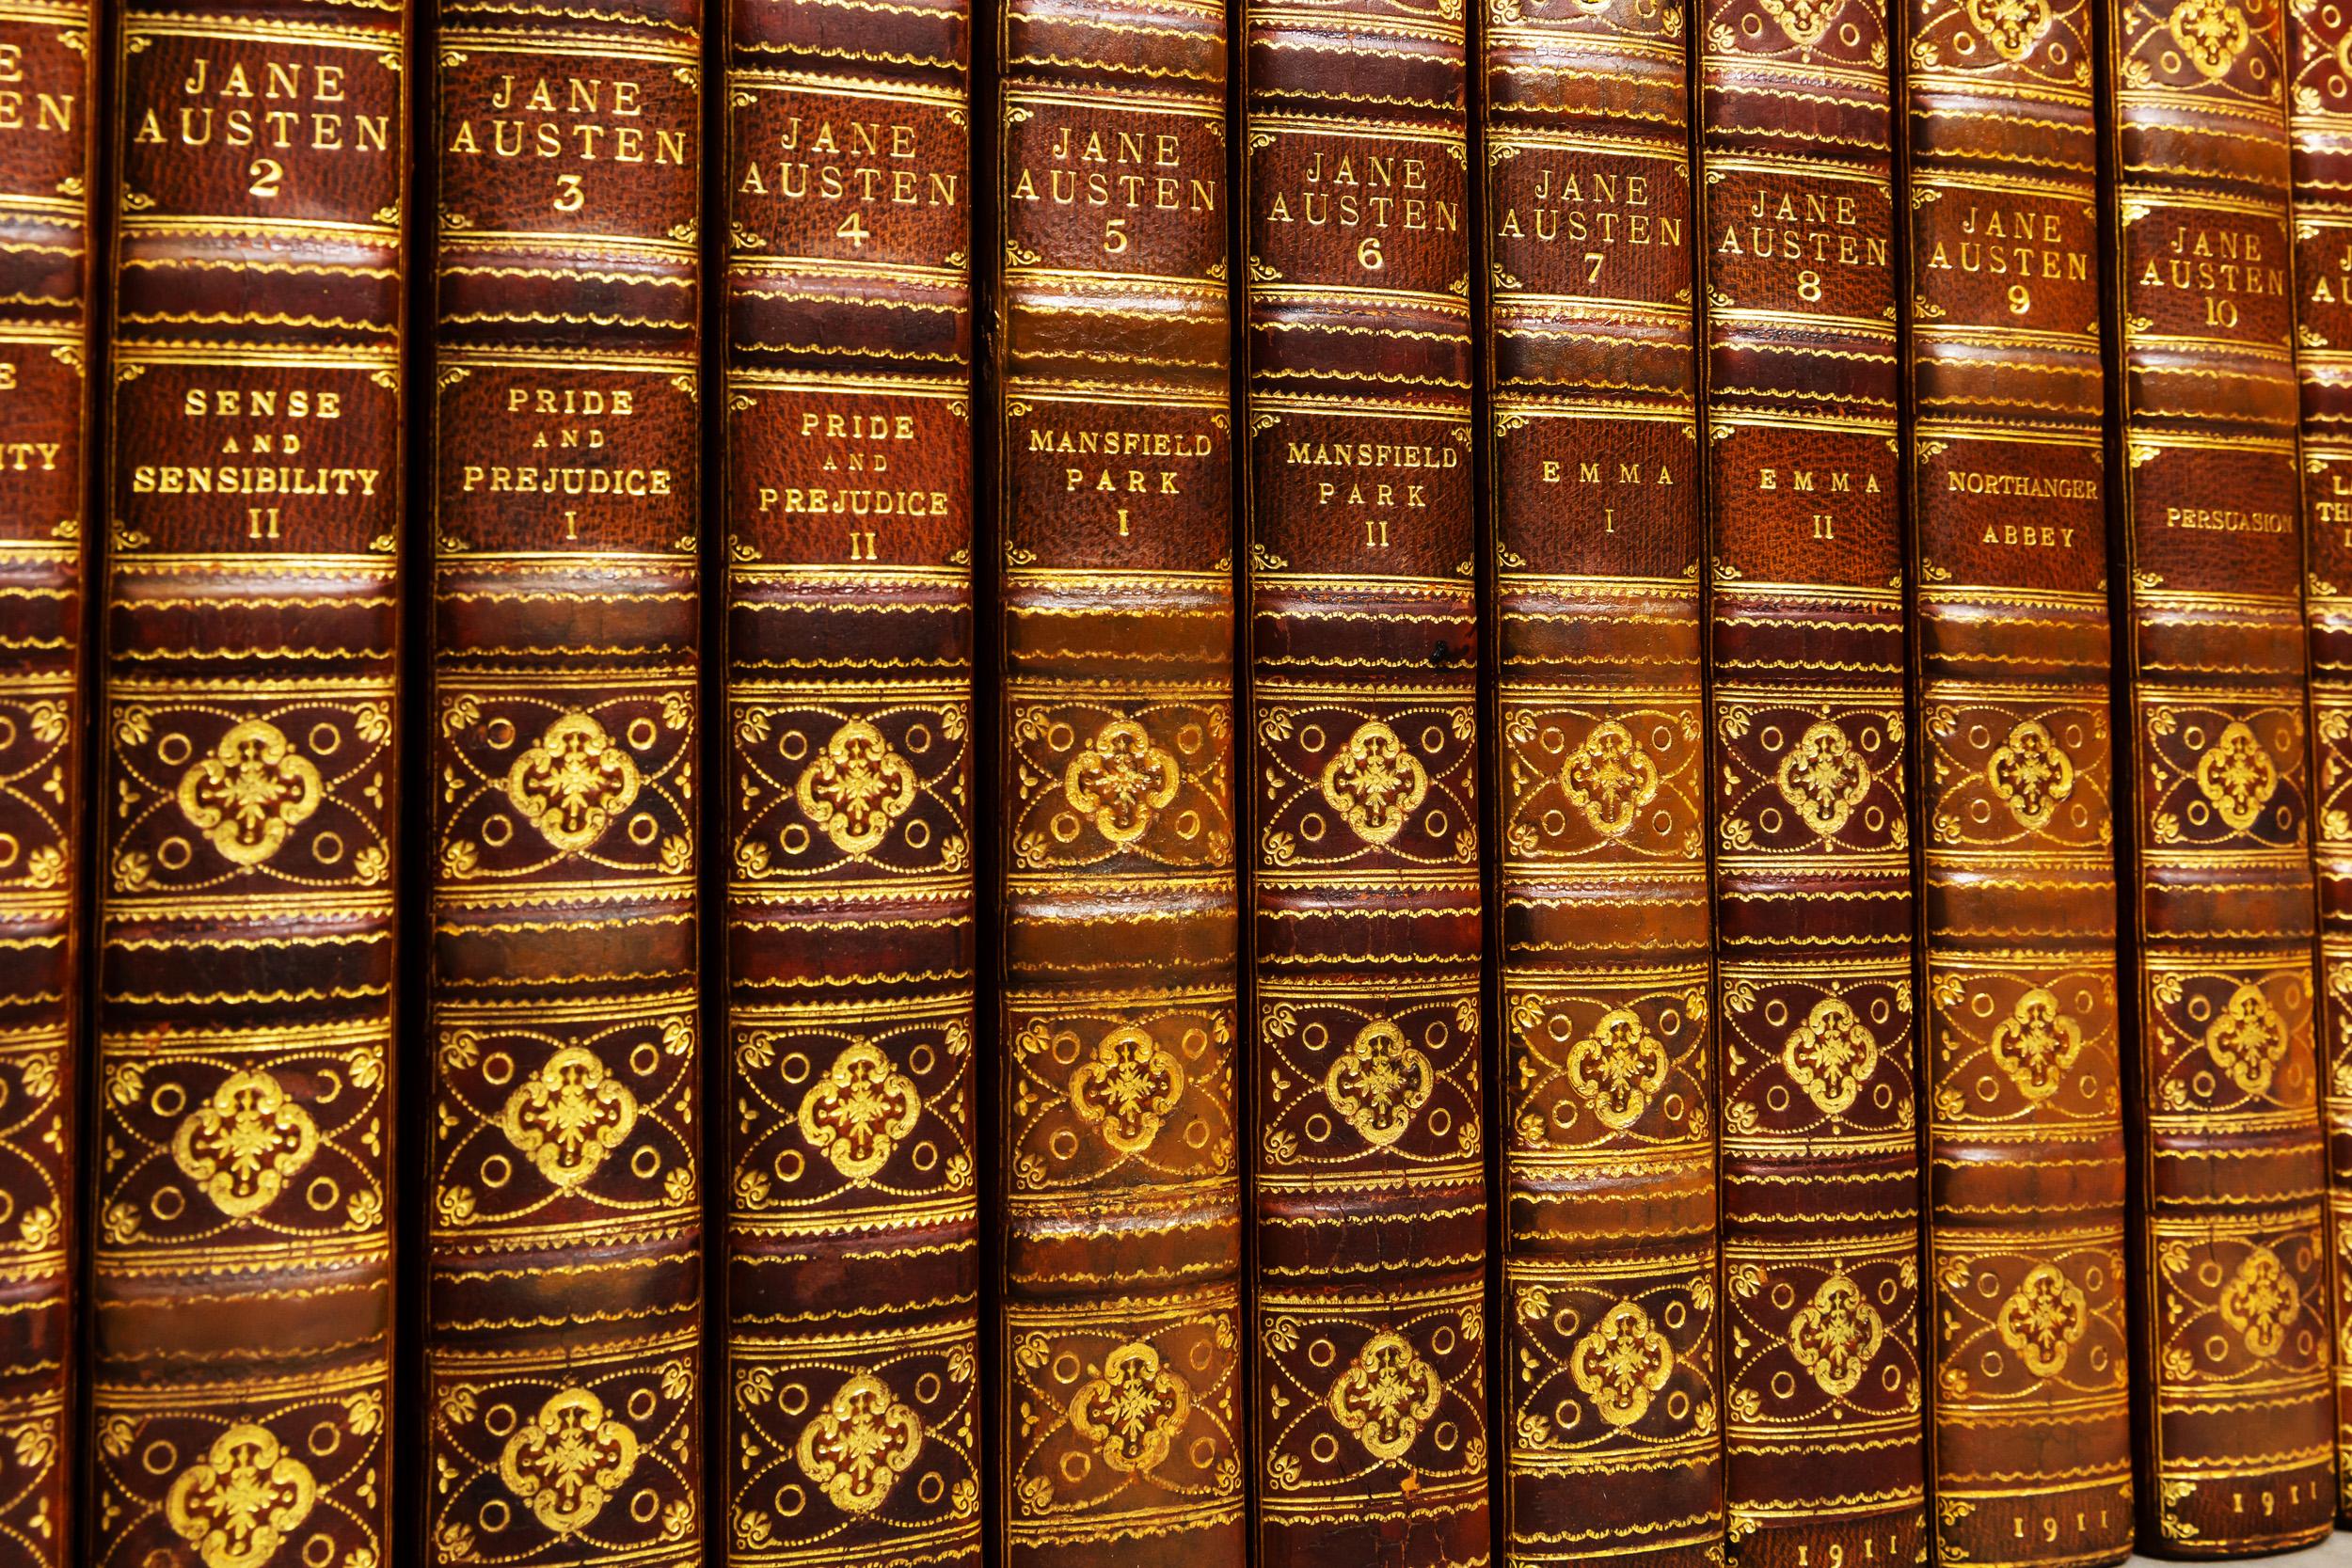 12 Volumes

Bound in full tan polished Calf by Zaehnsdorf, top edges gilt, raised bands, ornate gilt on spines, Frontispieces.

Published: Edinburgh: John Grant 1911. 

Beautiful Set of the Best Edition.